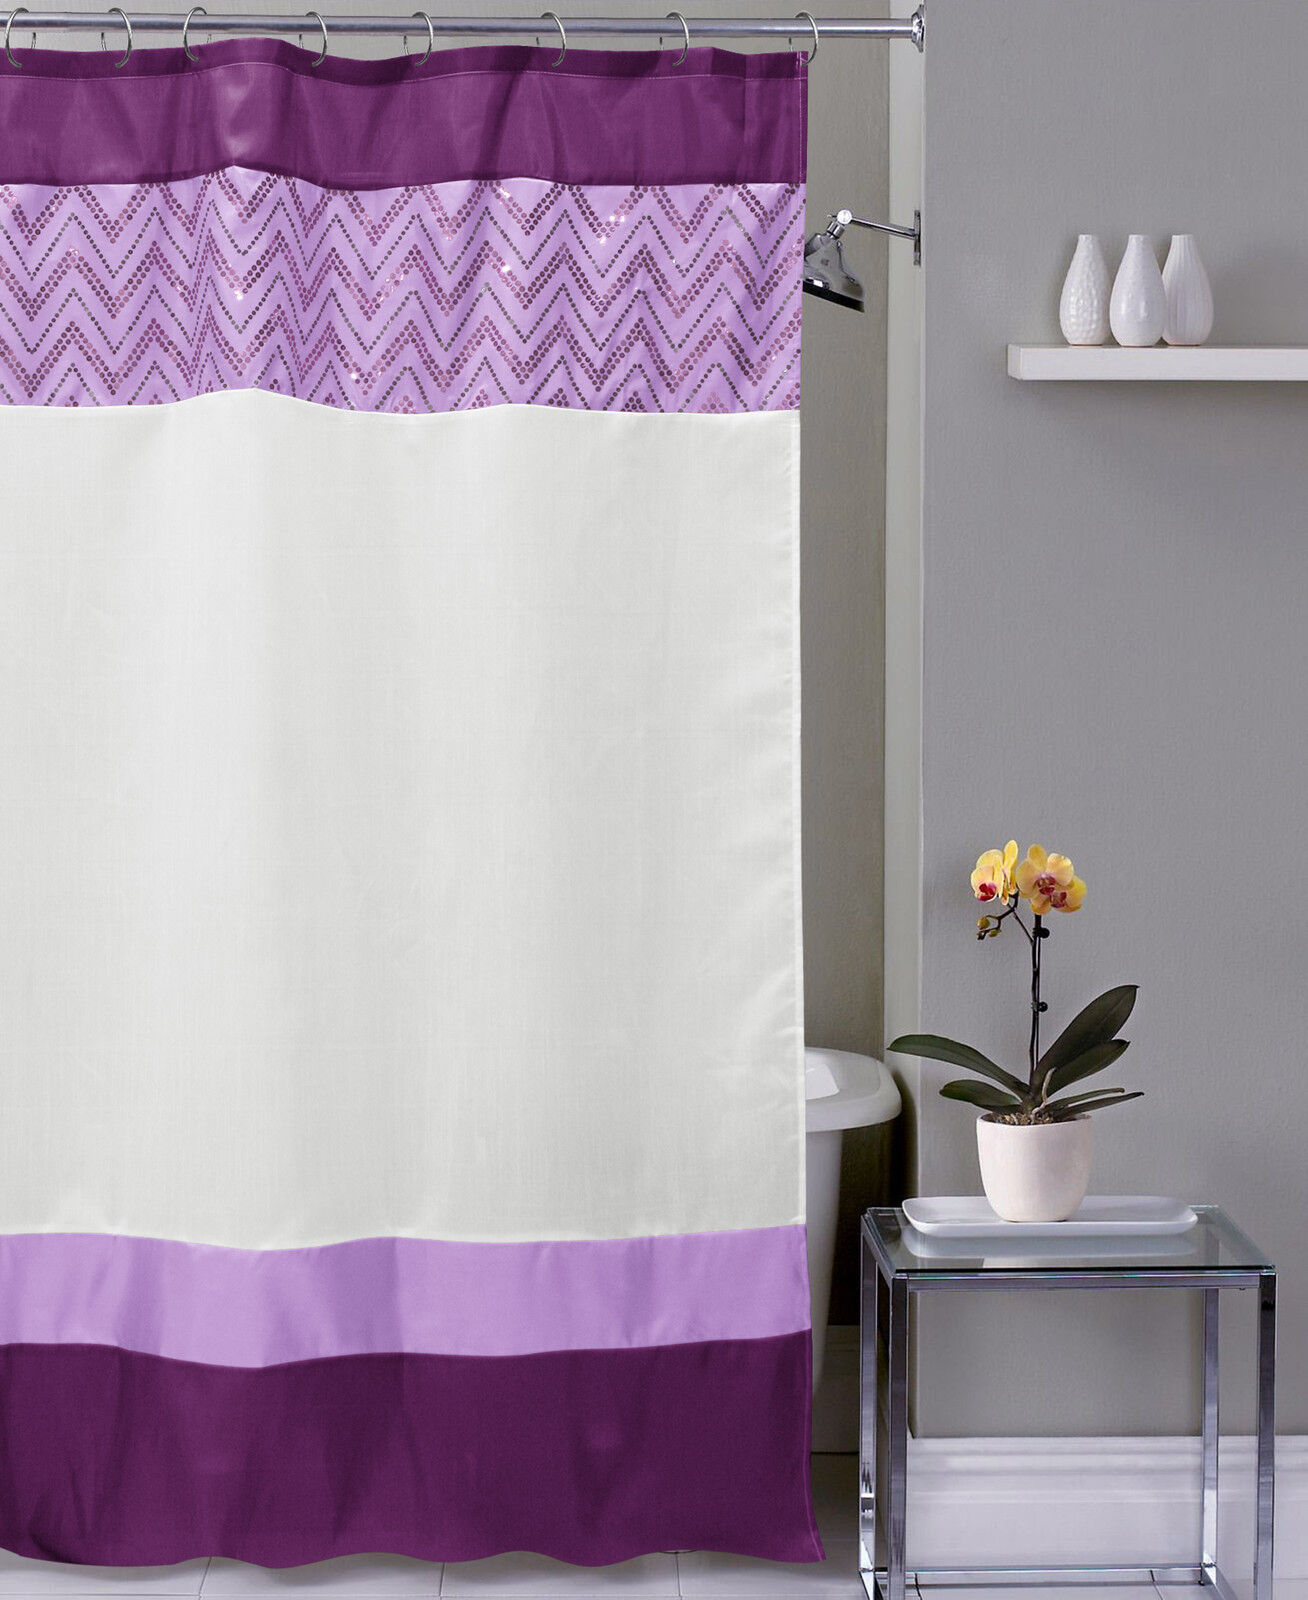 Chd Cresthome Lavender Purple Pink, Pink And White Chevron Shower Curtain